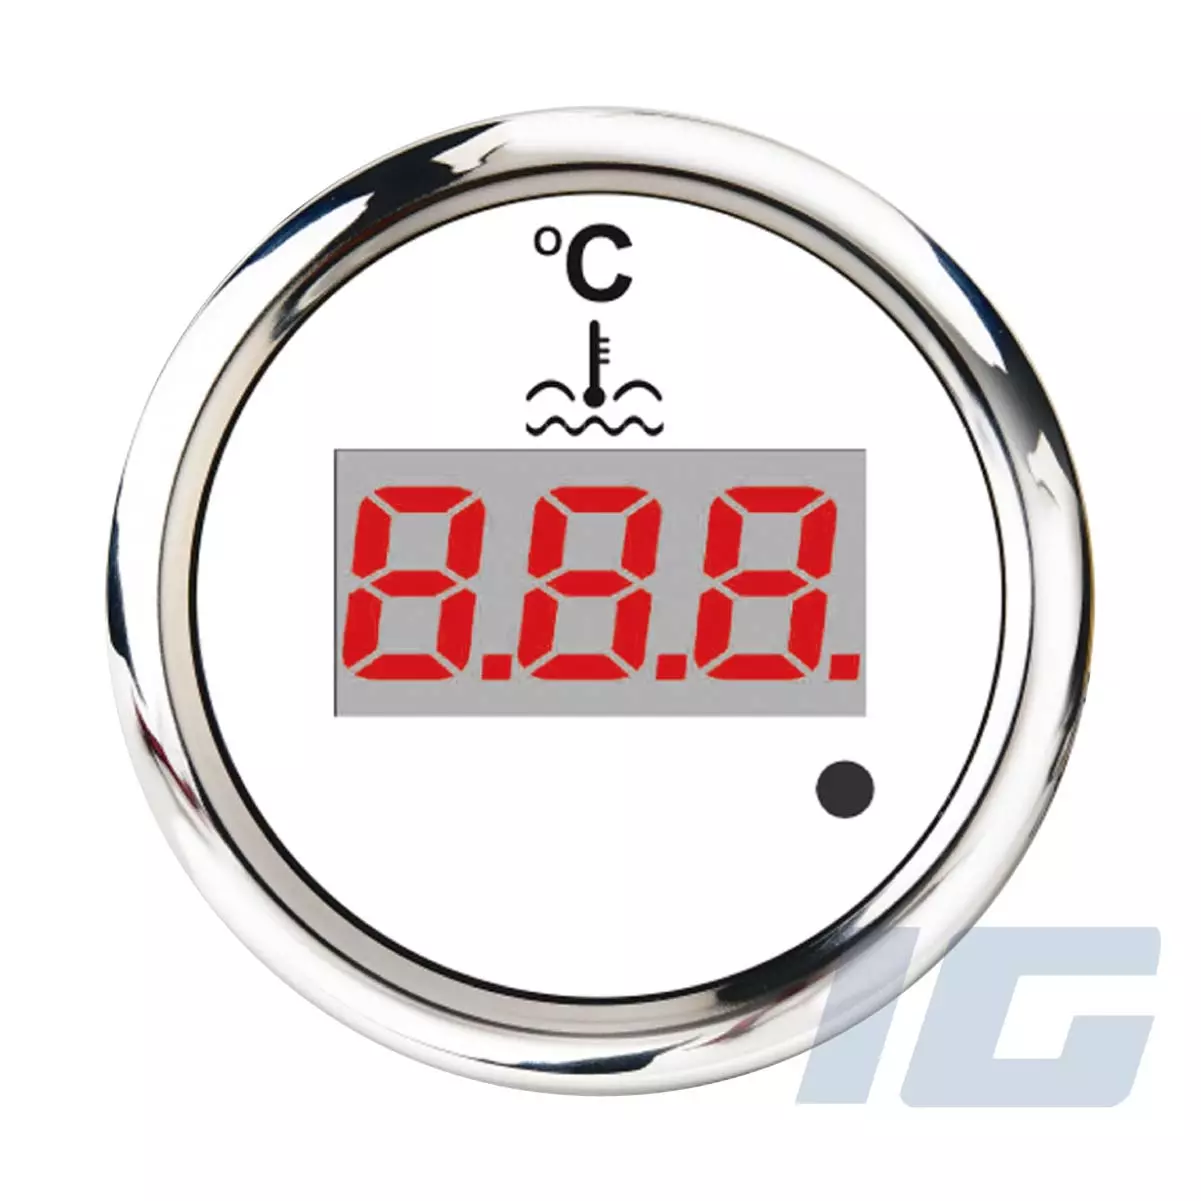 igauge, W Pro, Series, 52mm, White Face, Aftermarket, Marine, Gauge,Boat, Boat, Outboard, Water Temperature, kit